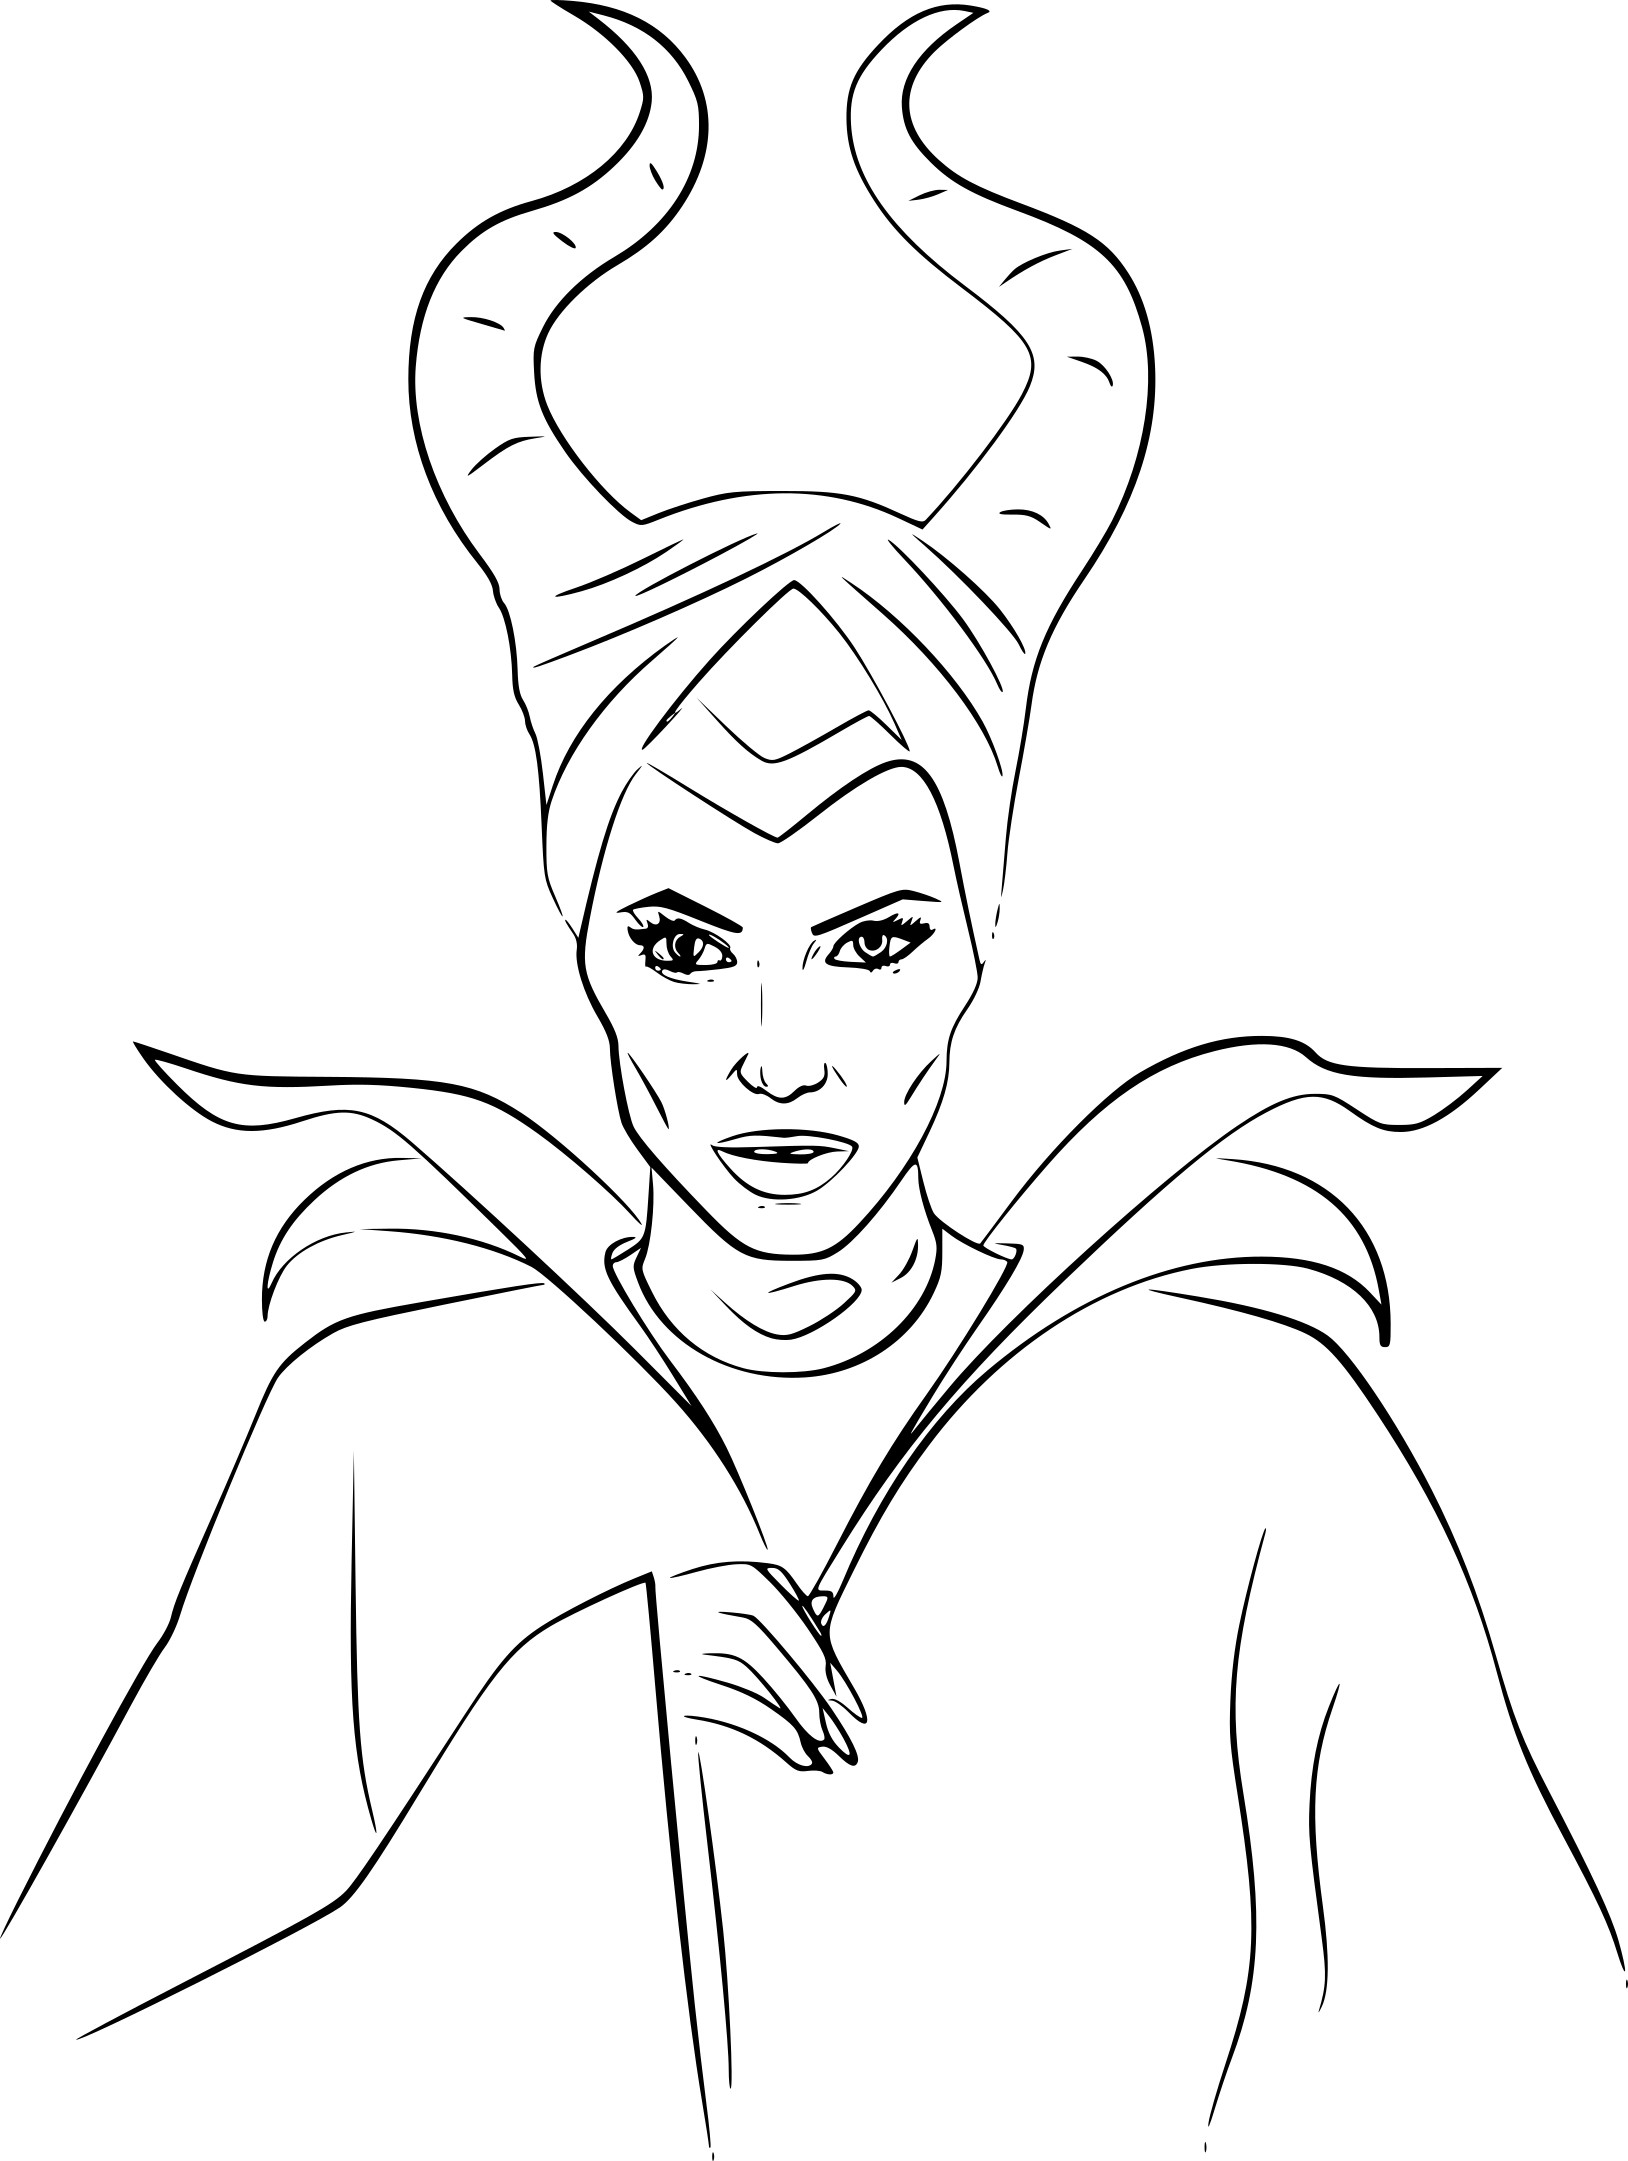 Maleficent Angelina Jolie coloring page